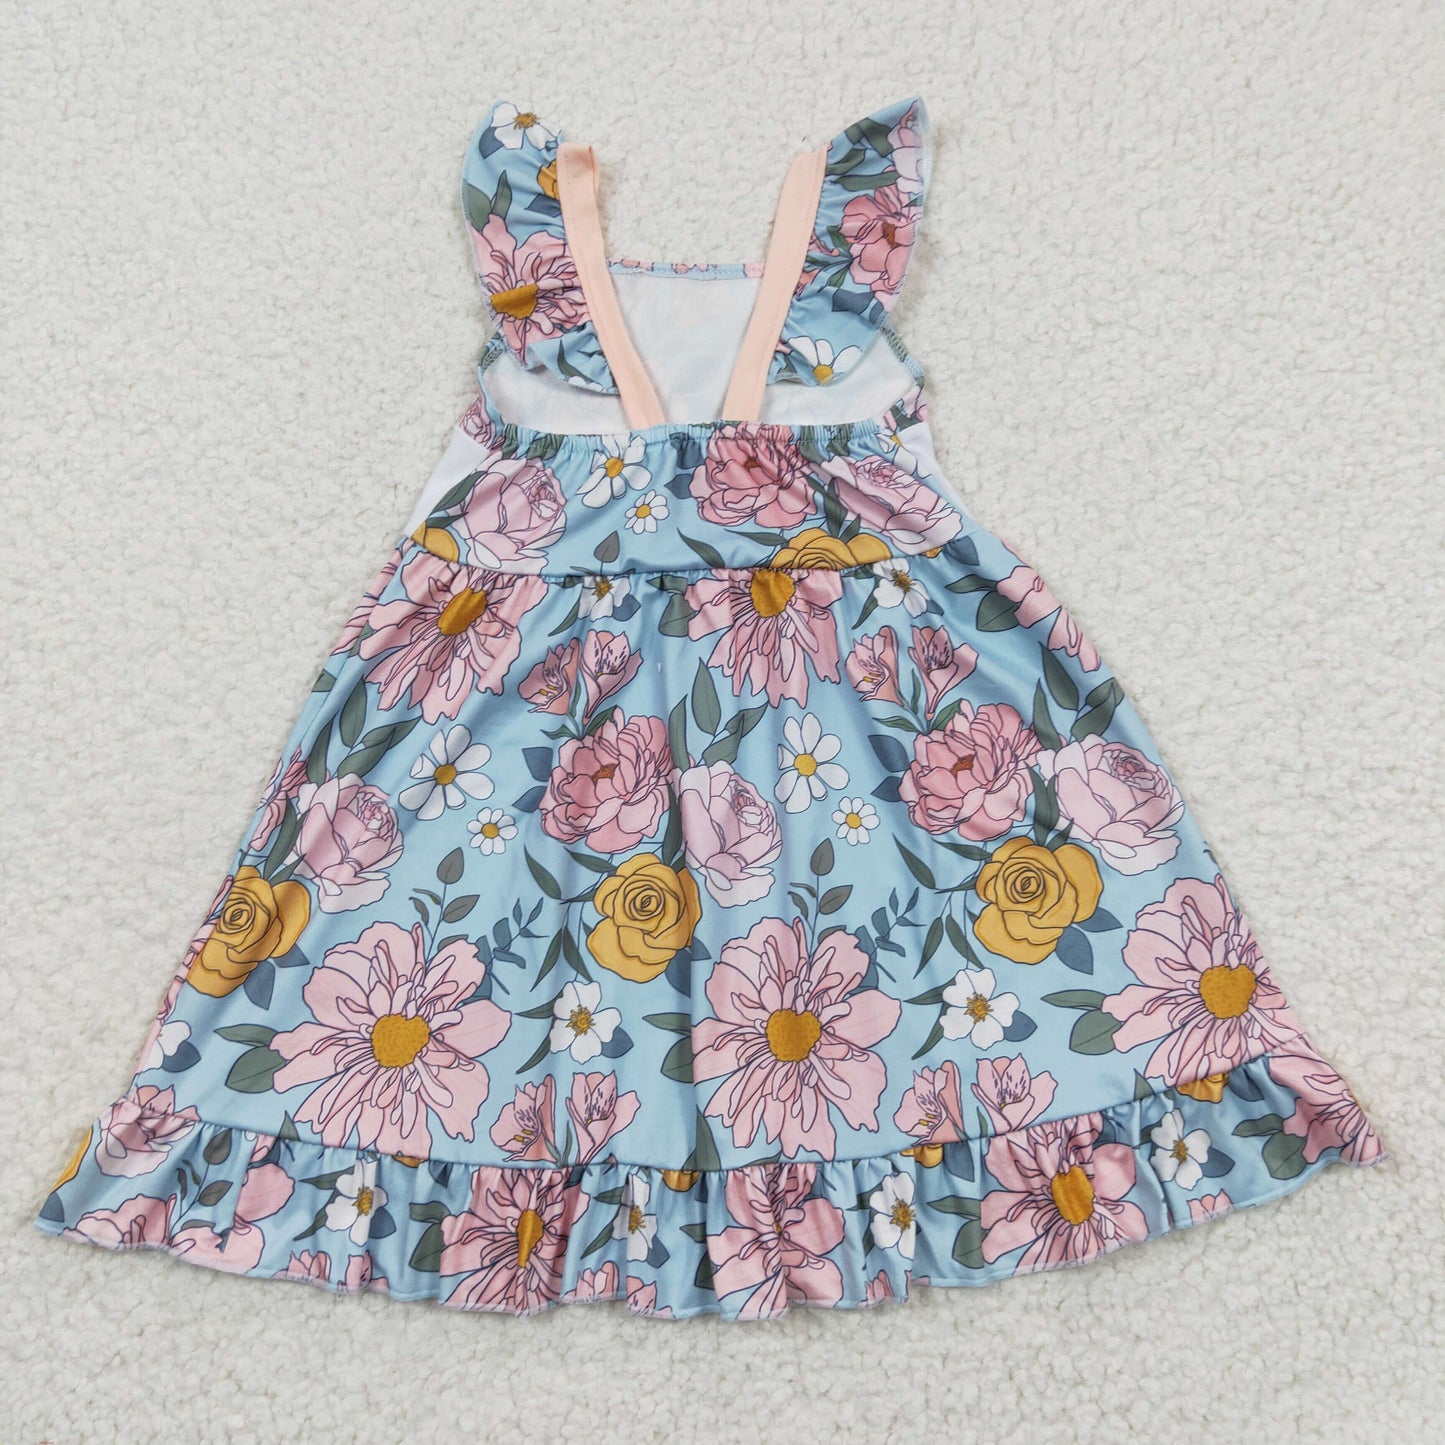 mama's girl floral bow embroidered dress